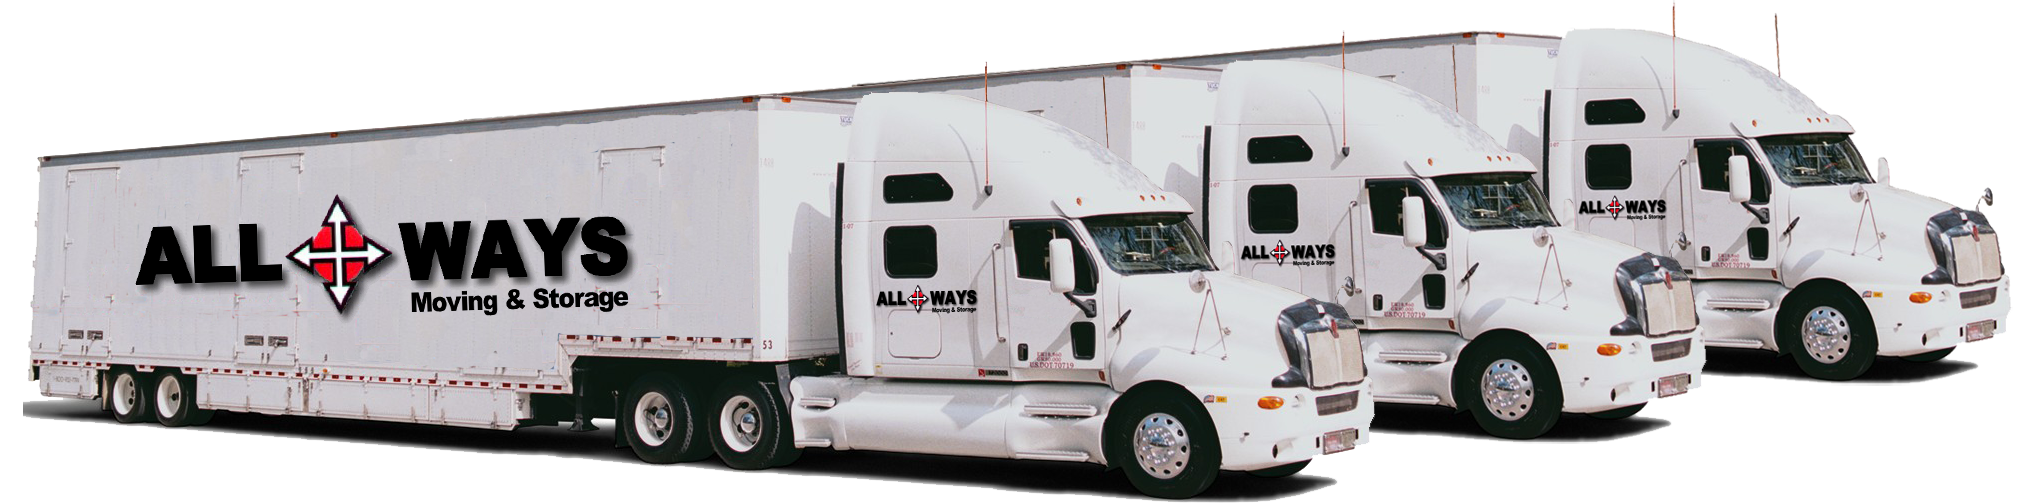 All ways Moving Services